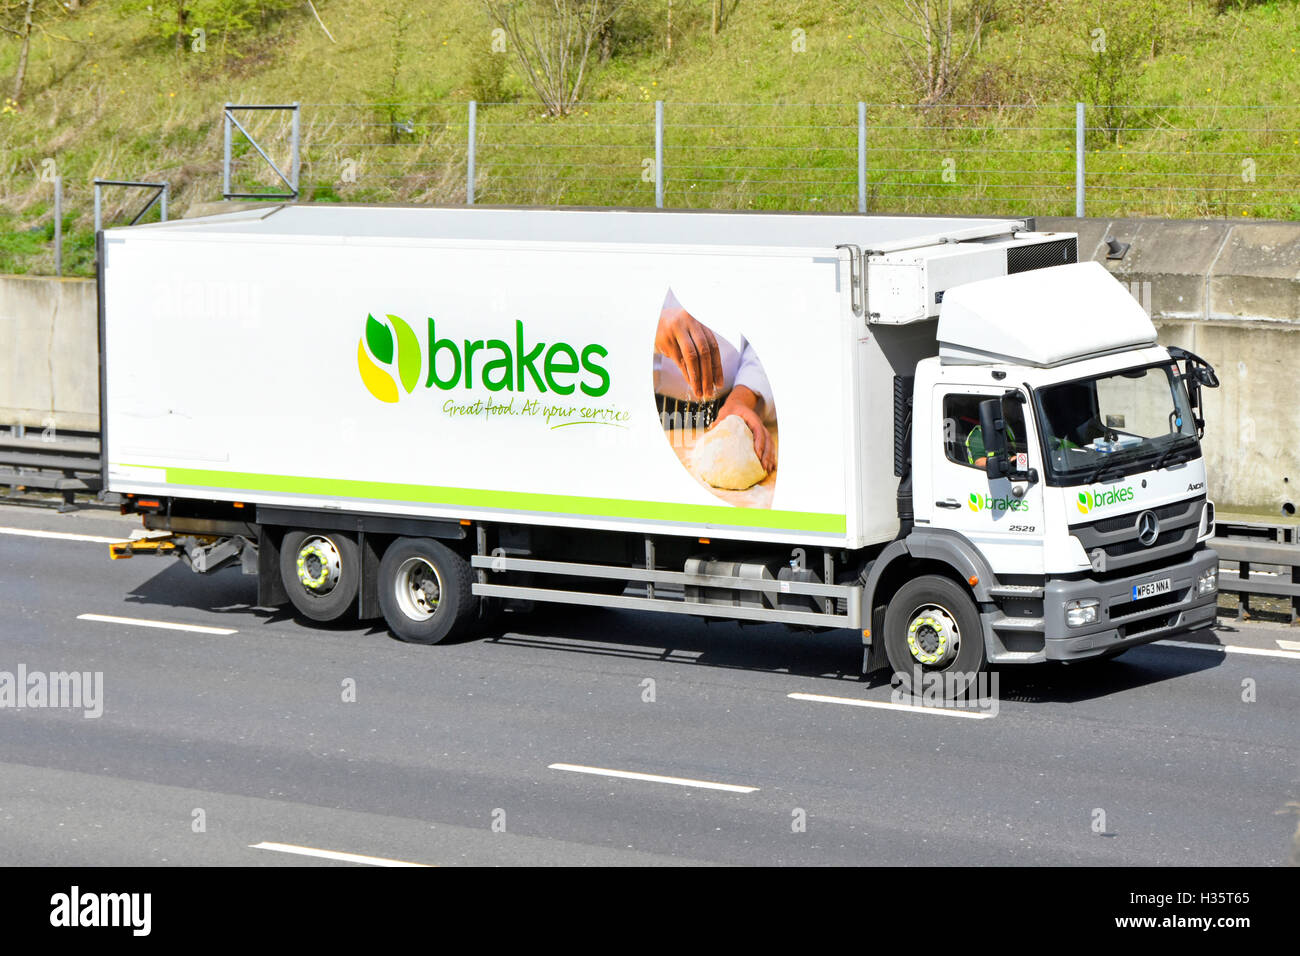 Front & side view of Brakes wholesale logistical services company food and drink distribution lorry on English UK motorway with product advertisement Stock Photo